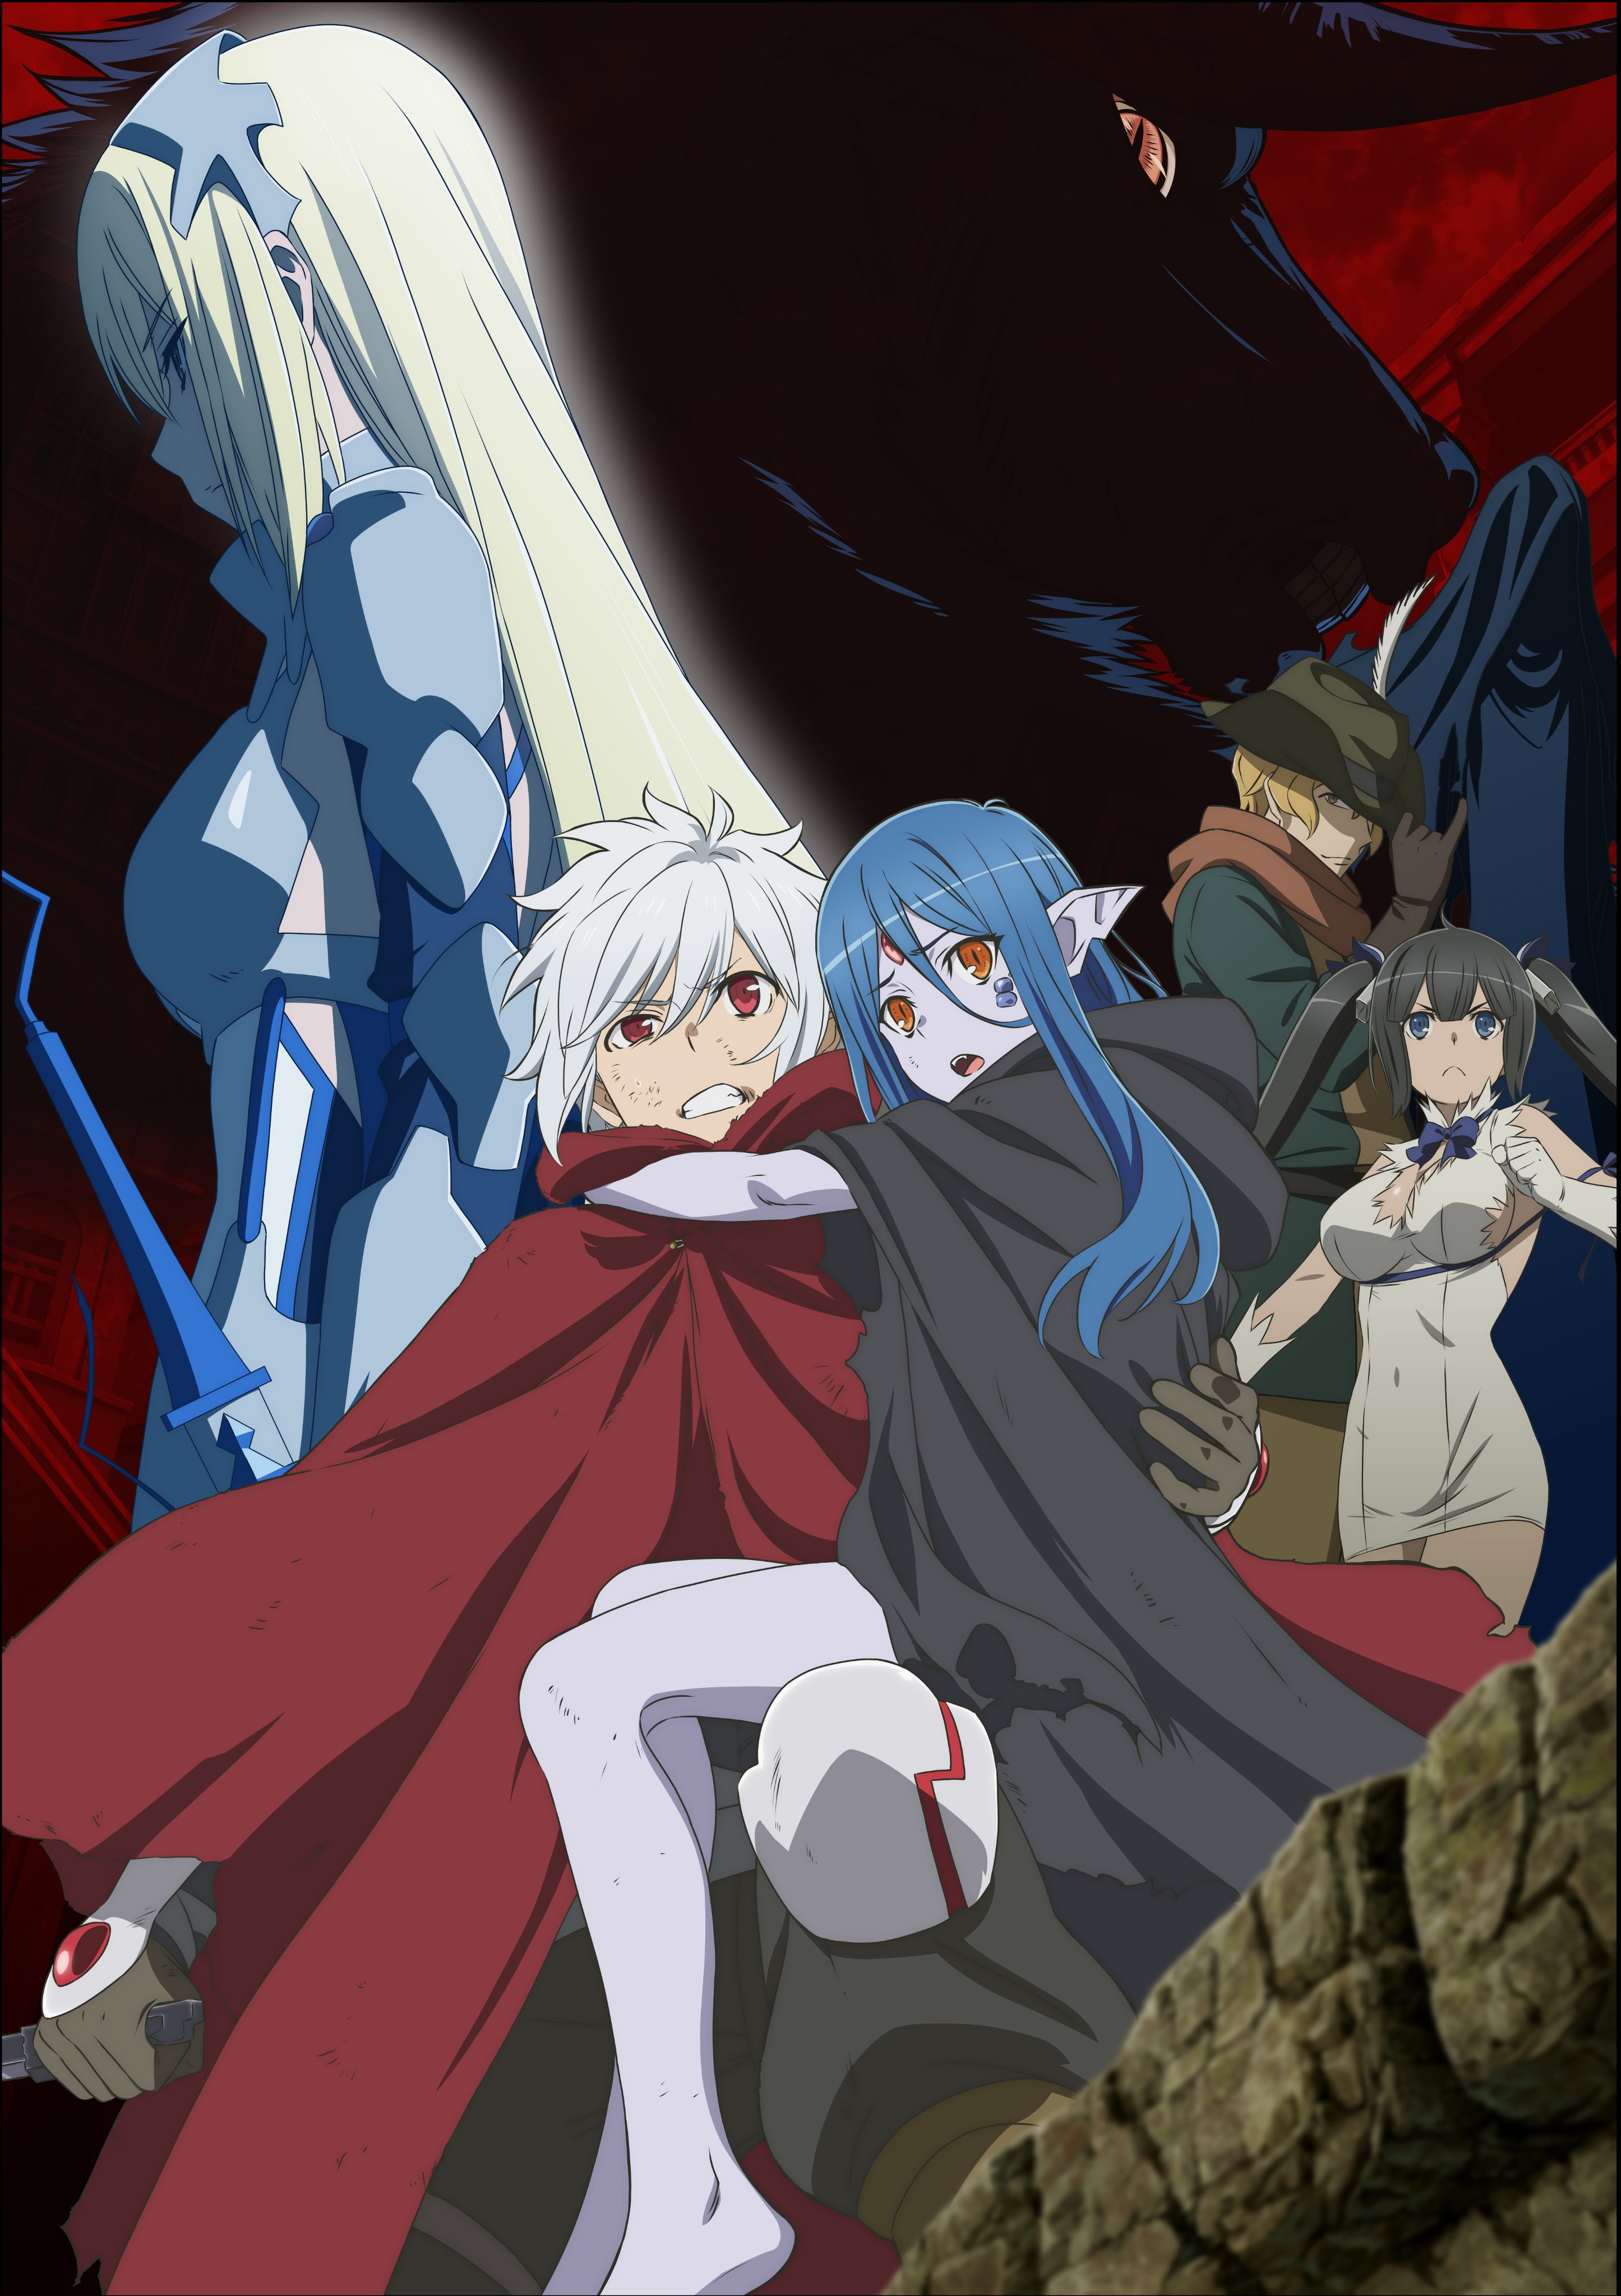 A key visual for the third season of the Is It Wrong to Try to Pick Up Girls in a Dungeon? TV anime, featuring Bell, Hestia, and Ais posing dramatically with a distressed elf girl in the foreground while shadowy figures loom in the background.